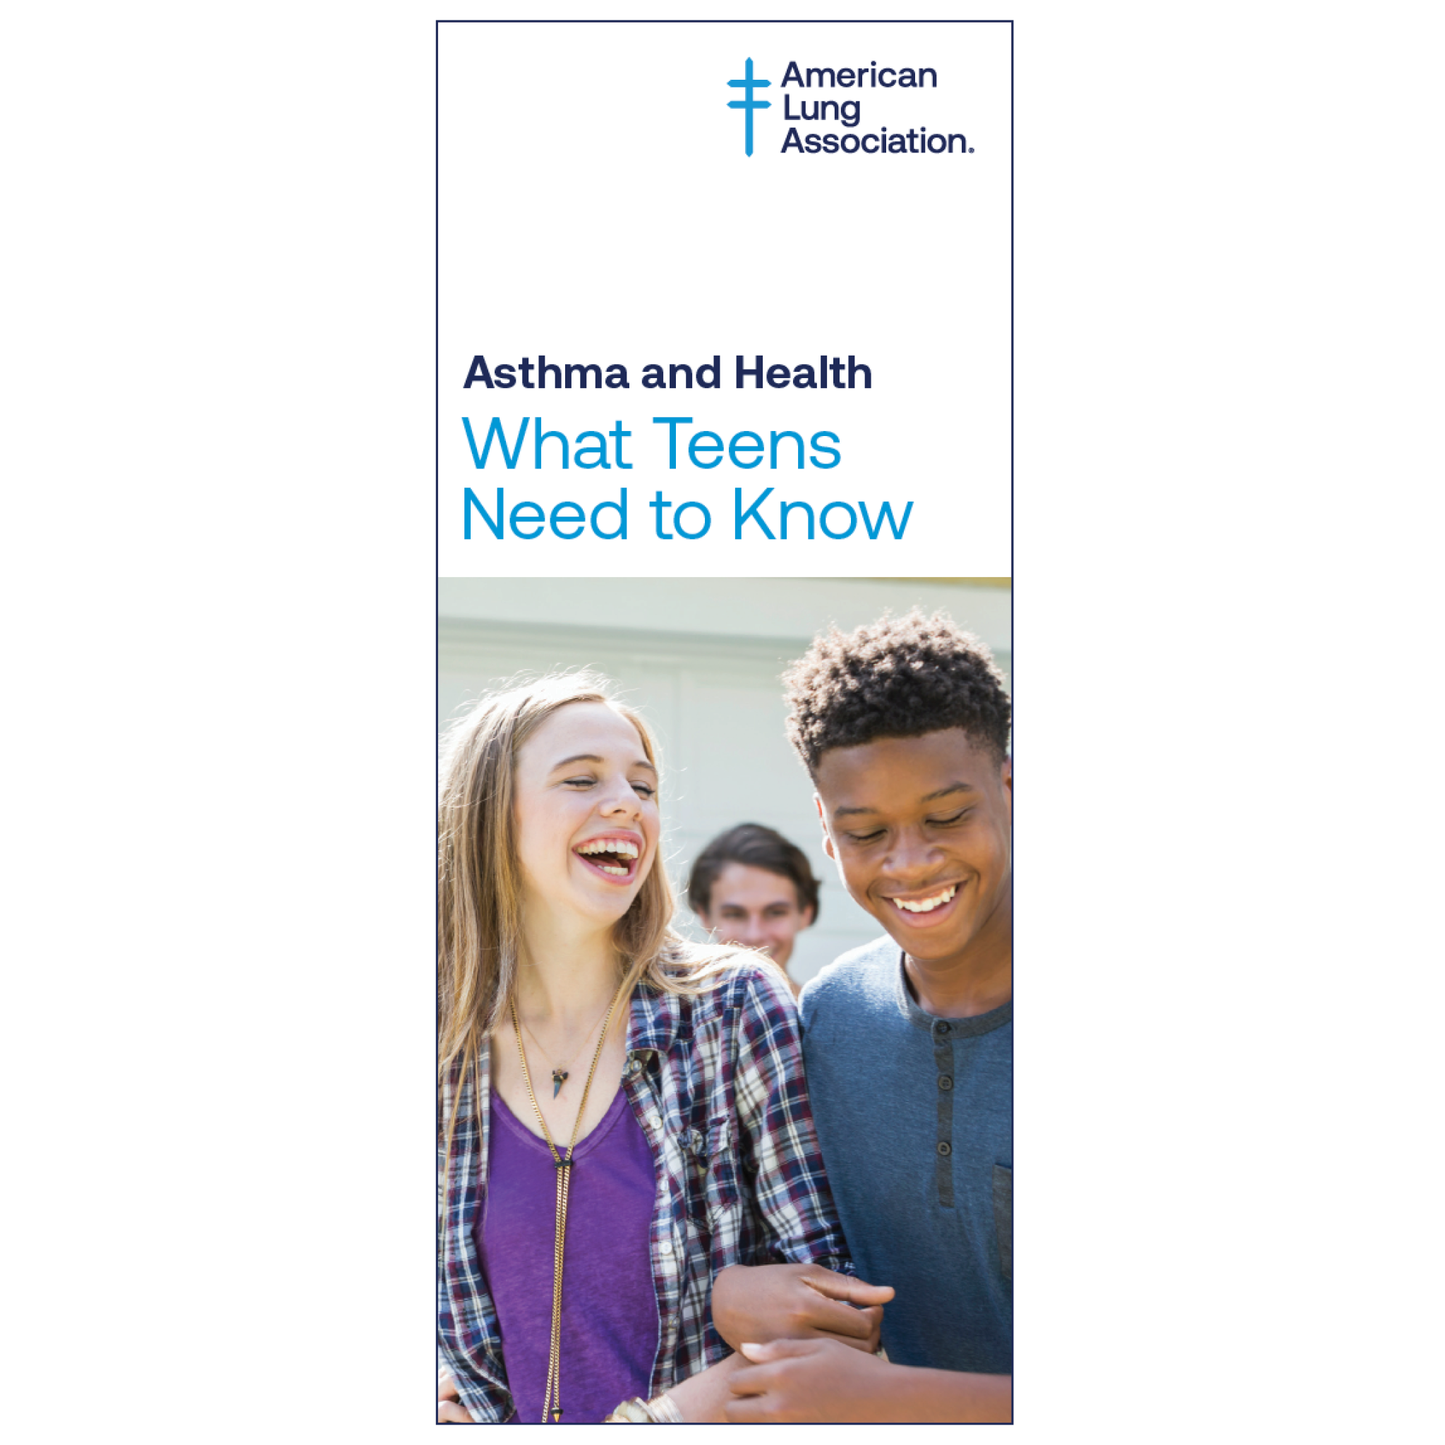 Asthma and Health: What Teens Need to Know